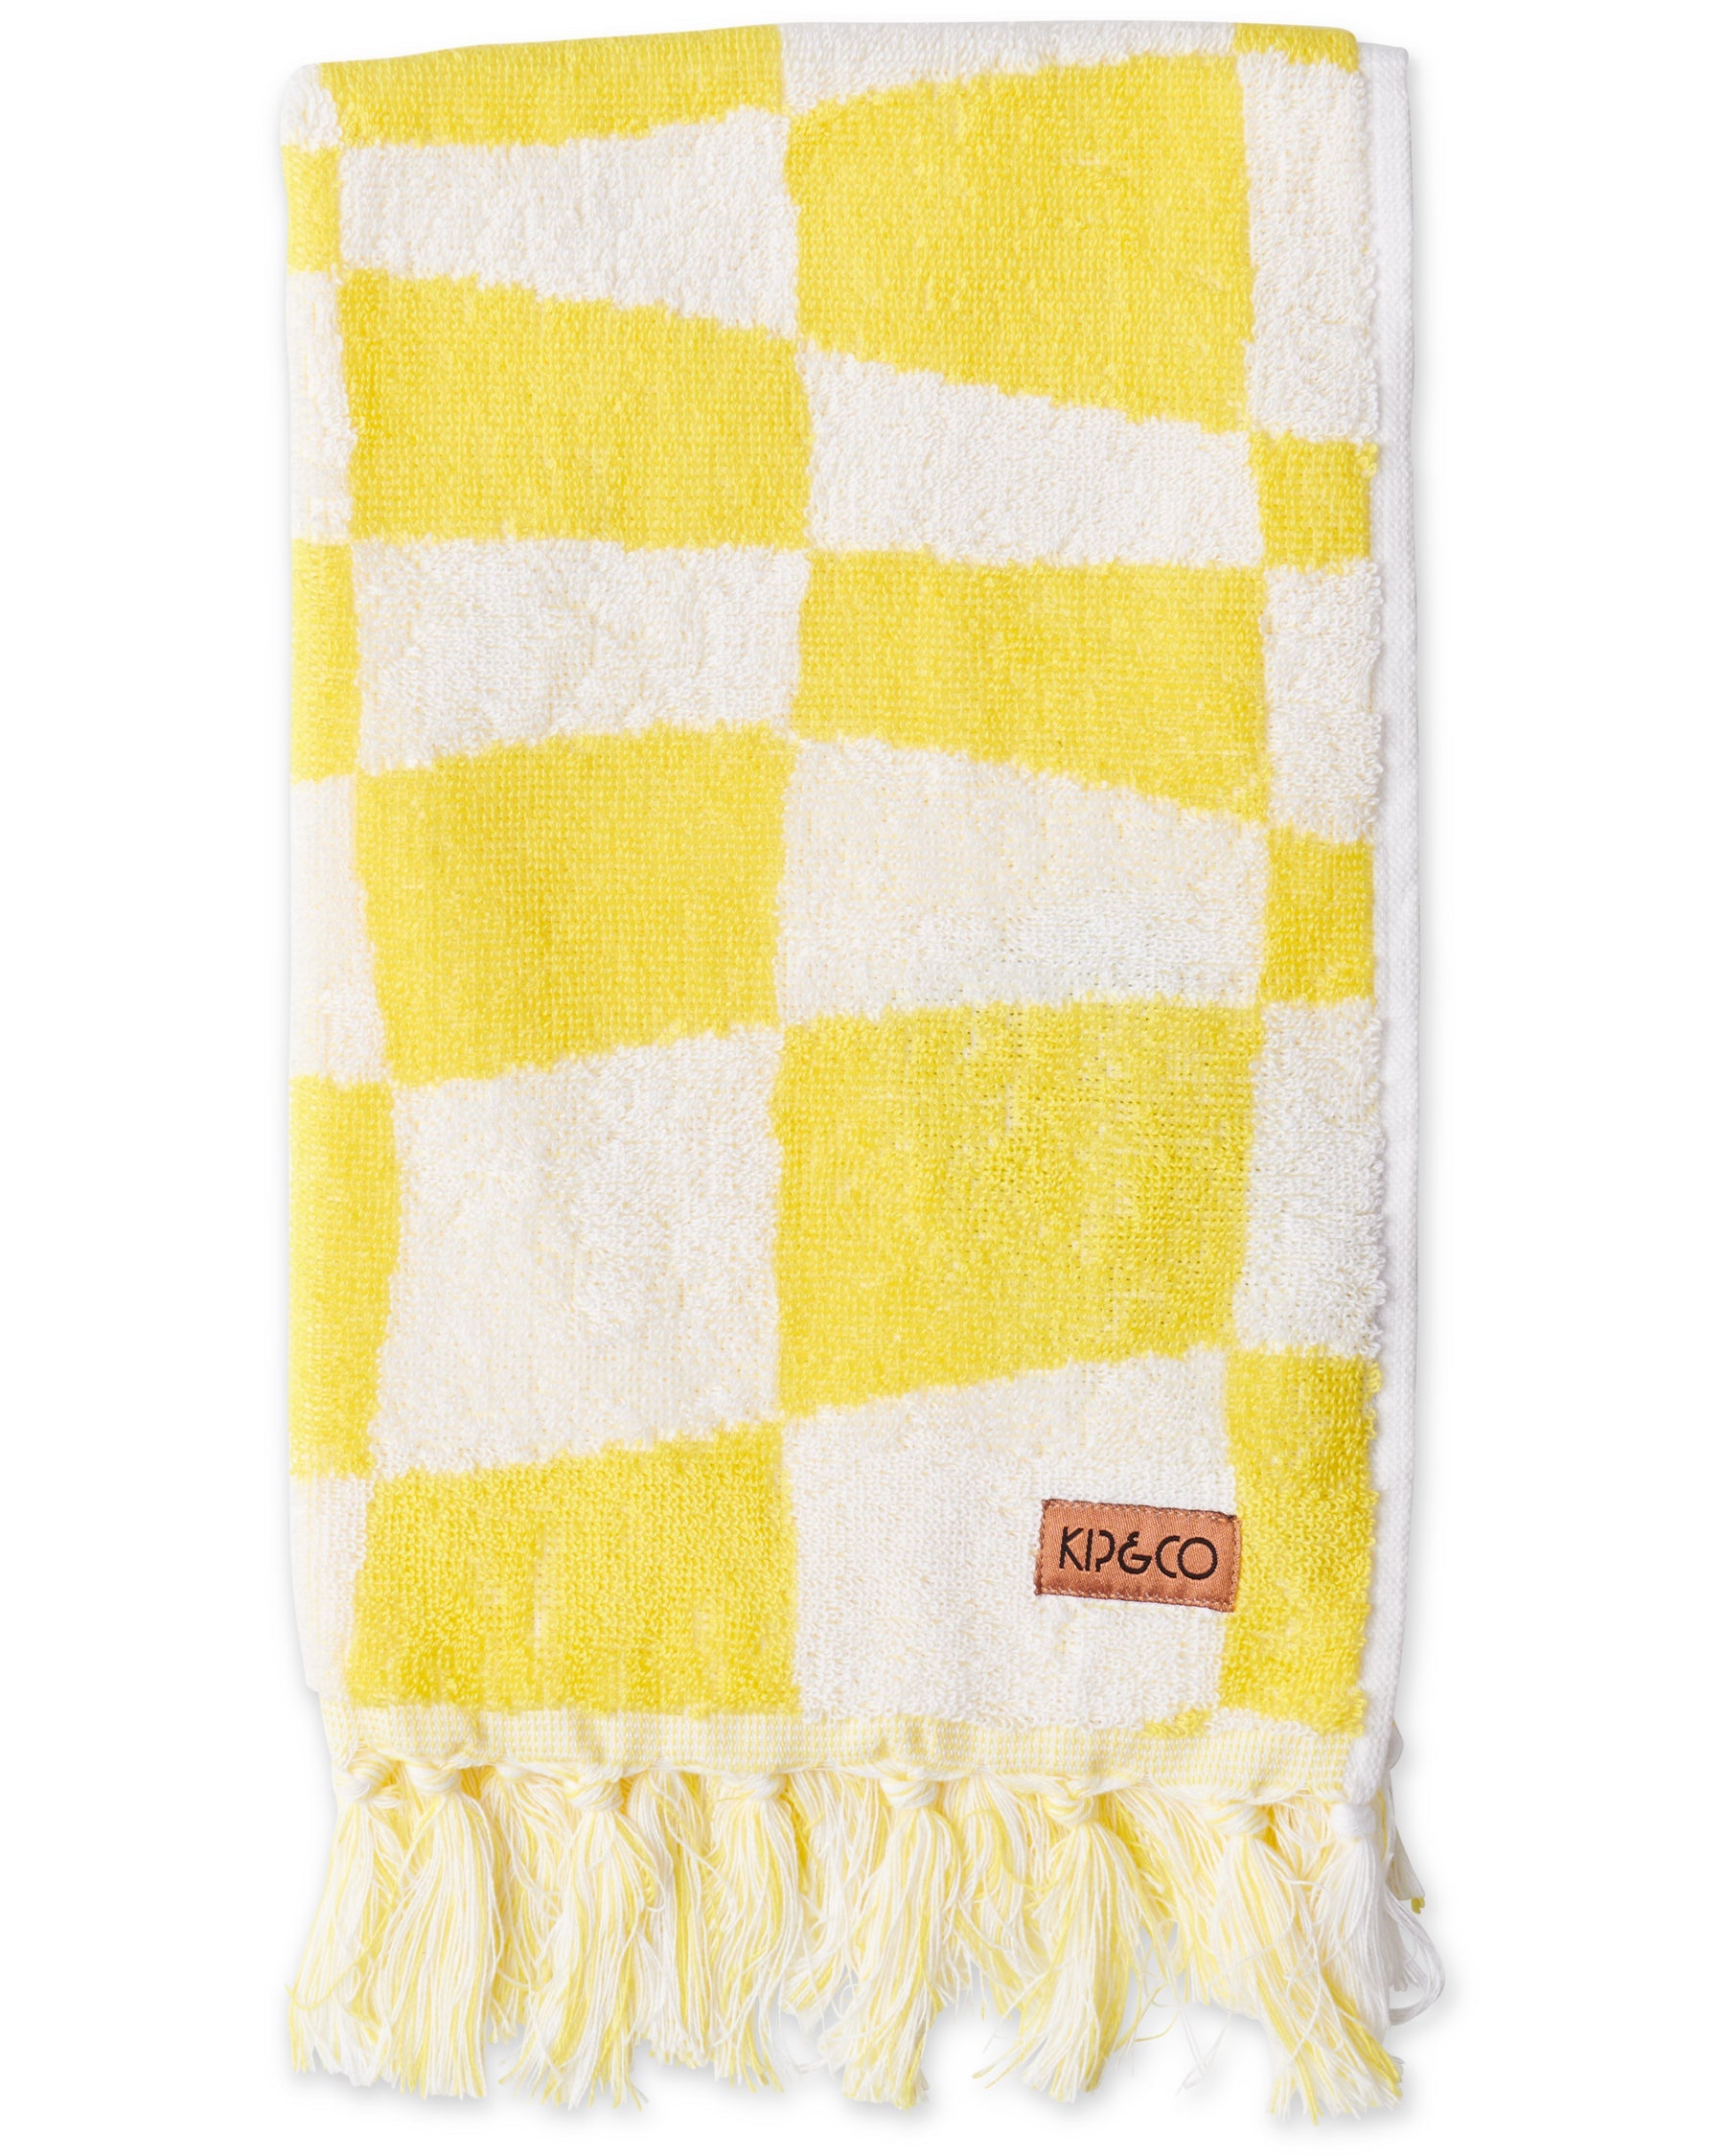 Akova White Cotton Terry Cloth Hand Towels And Wash Cloth Yellow Ducky READ